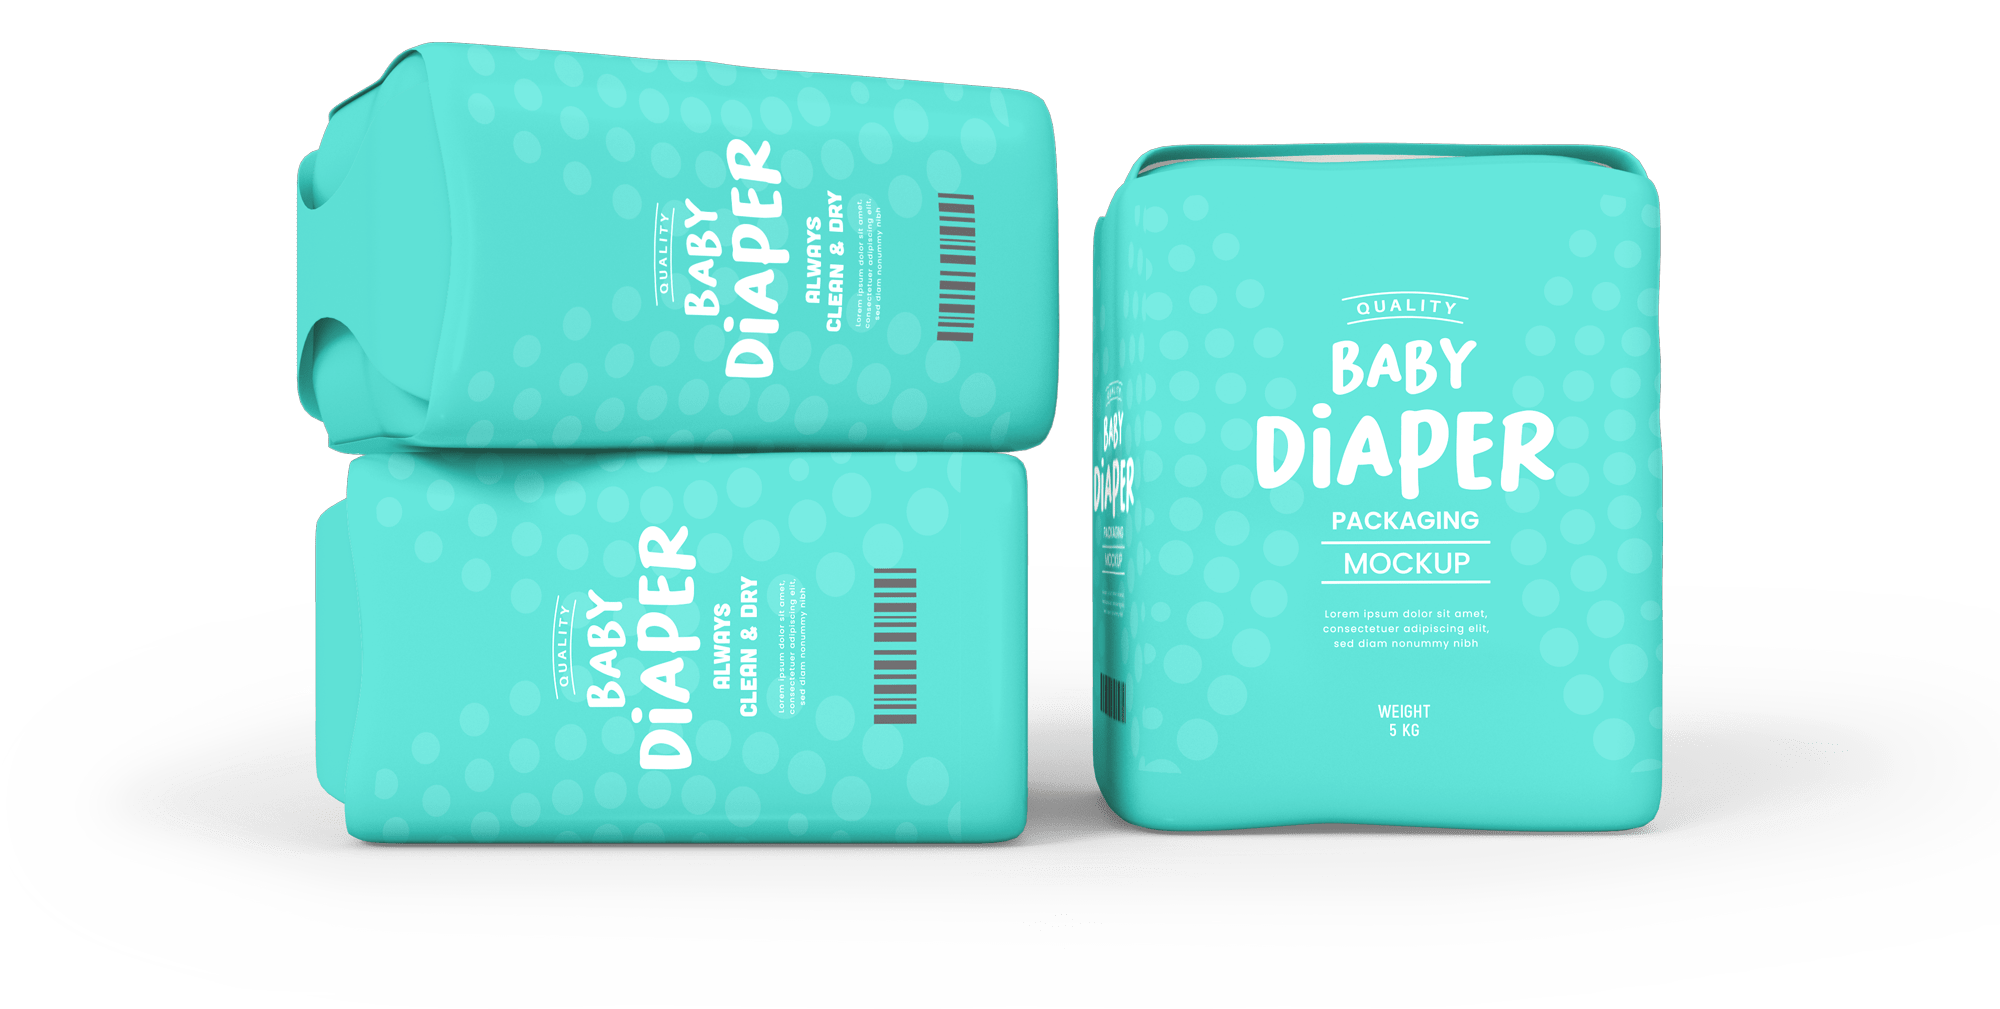 Consensys - Baby Diaper Product Category - Sample Package
